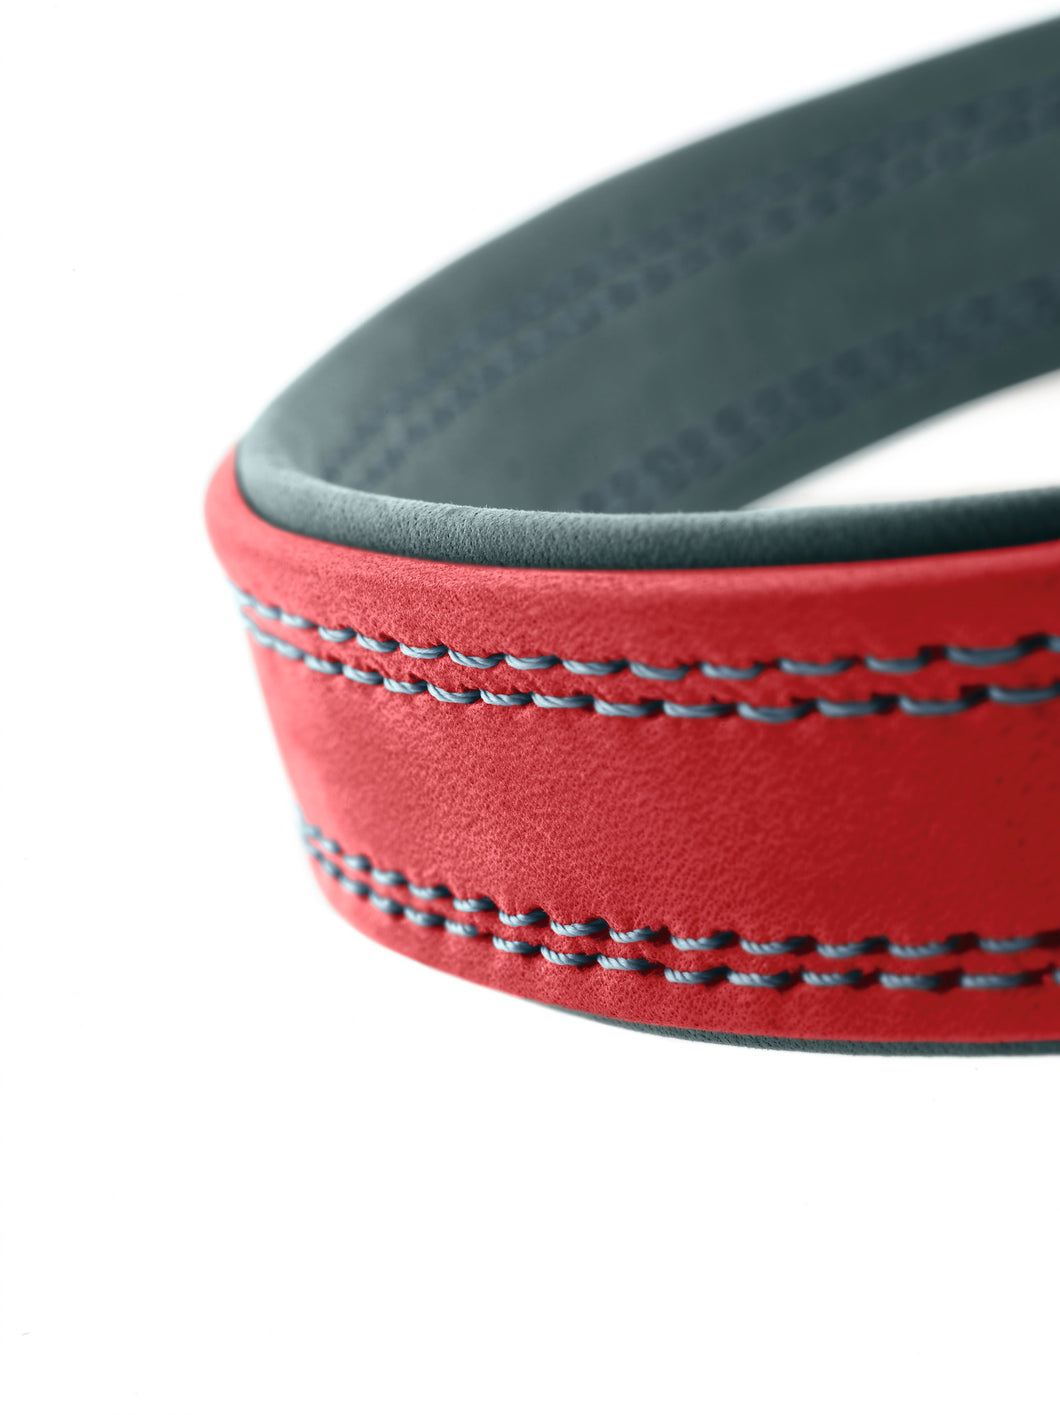 Hunter 'Lucca' Leather Leash - Red & Turquoise